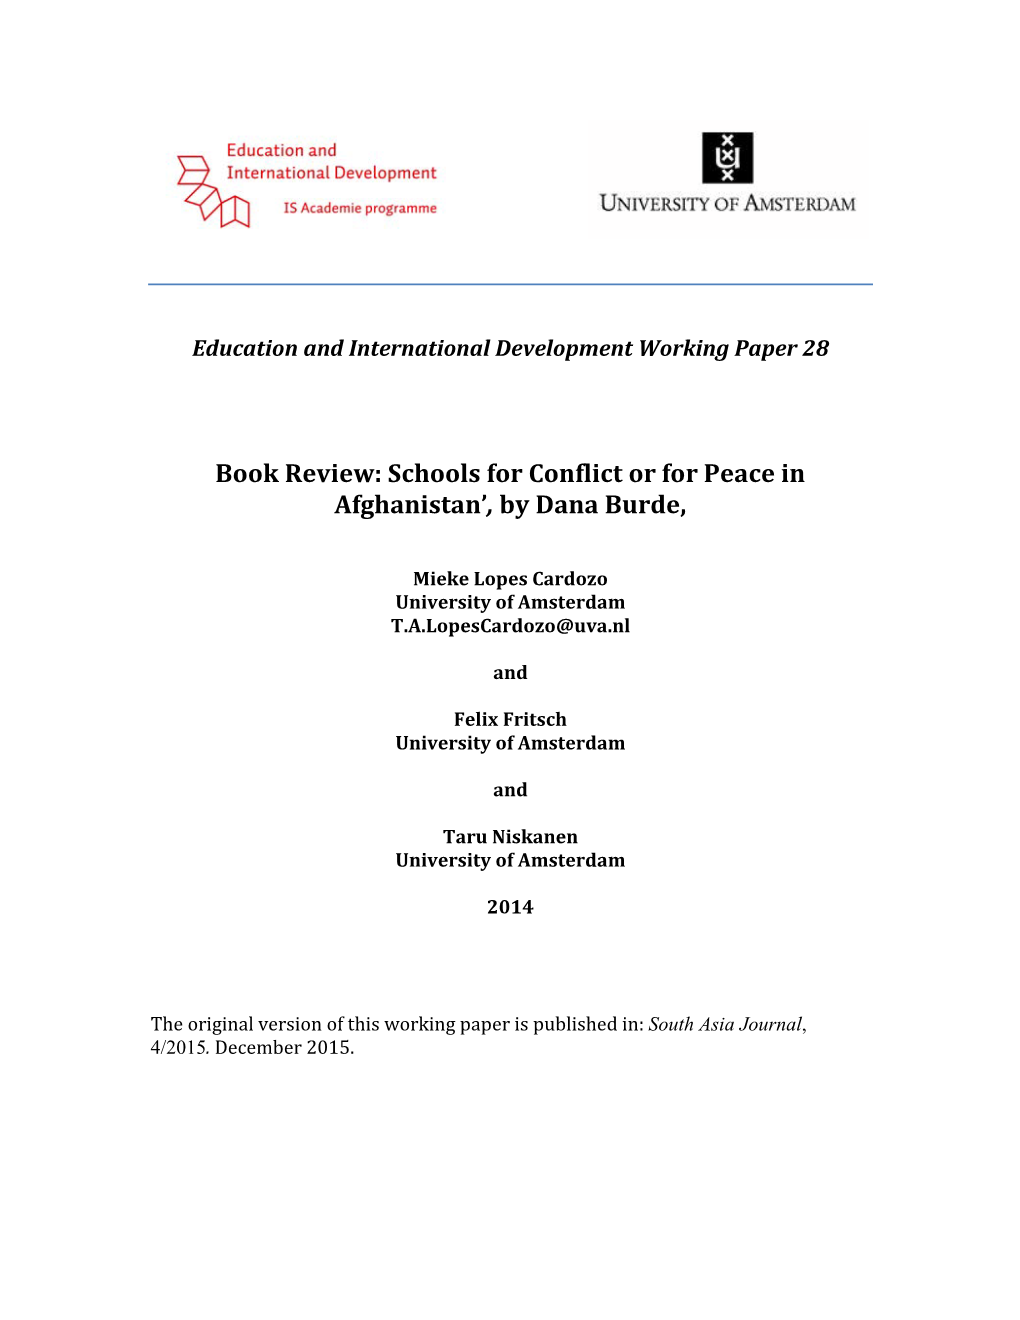 Book Review: Schools for Conflict Or for Peace in Afghanistan’, by Dana Burde